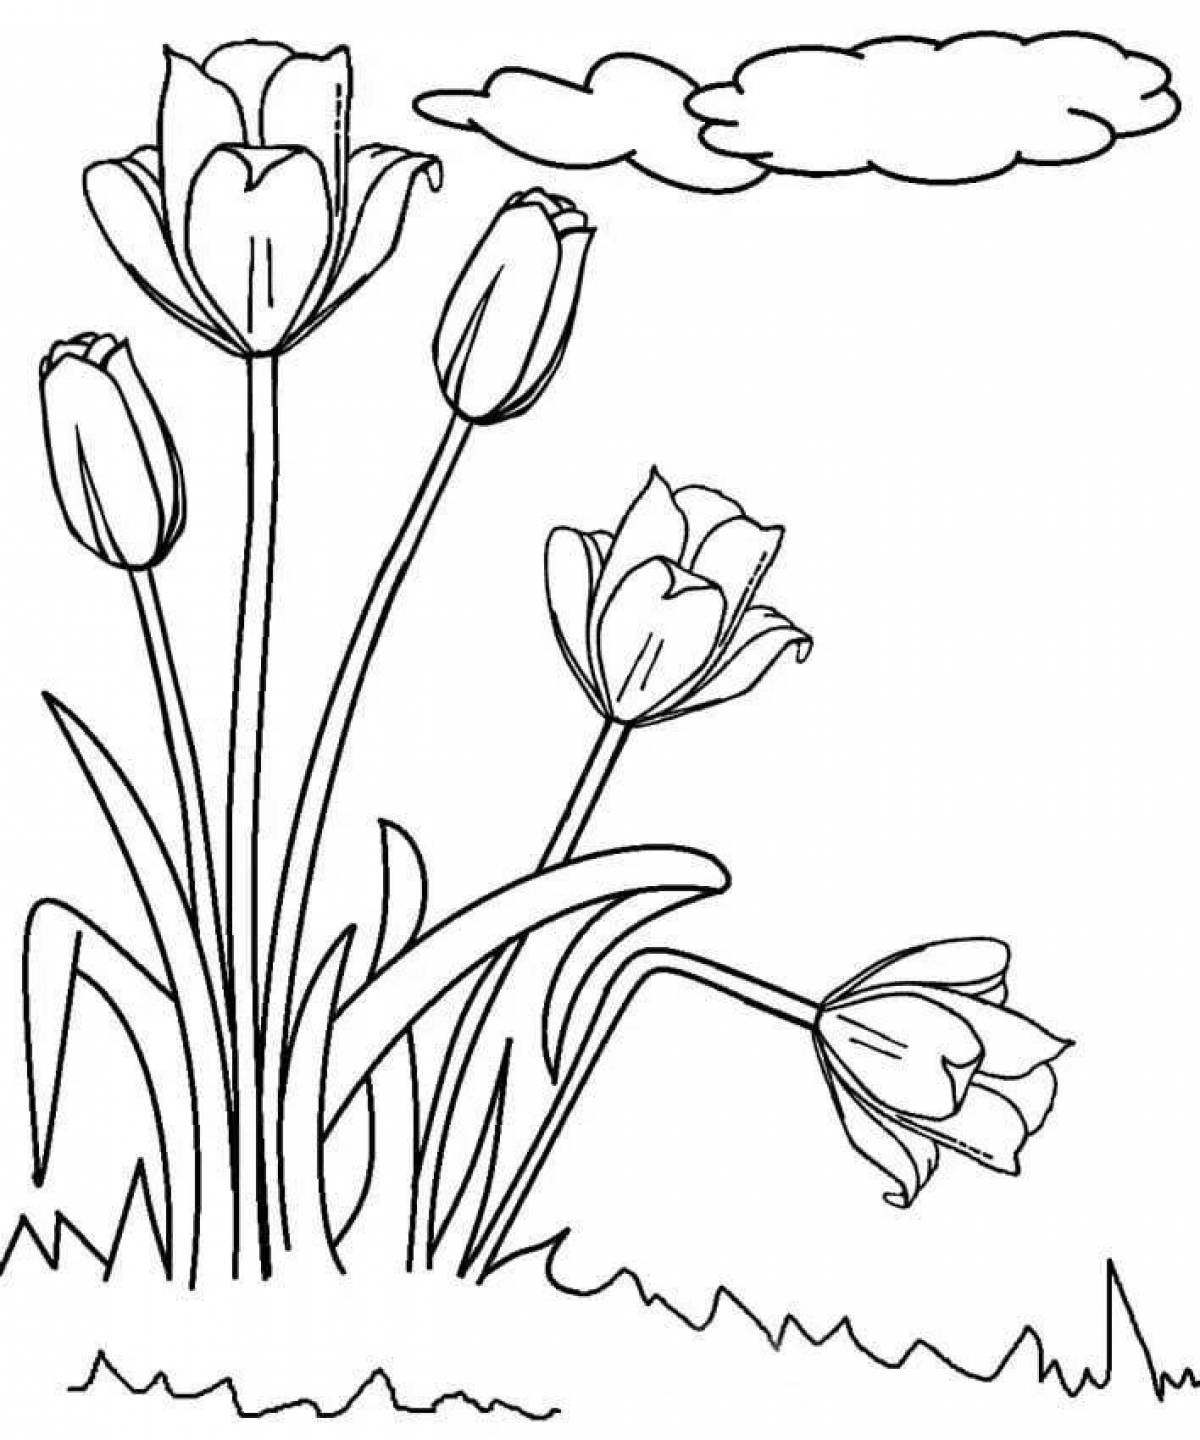 Lovely tulip coloring page for kids